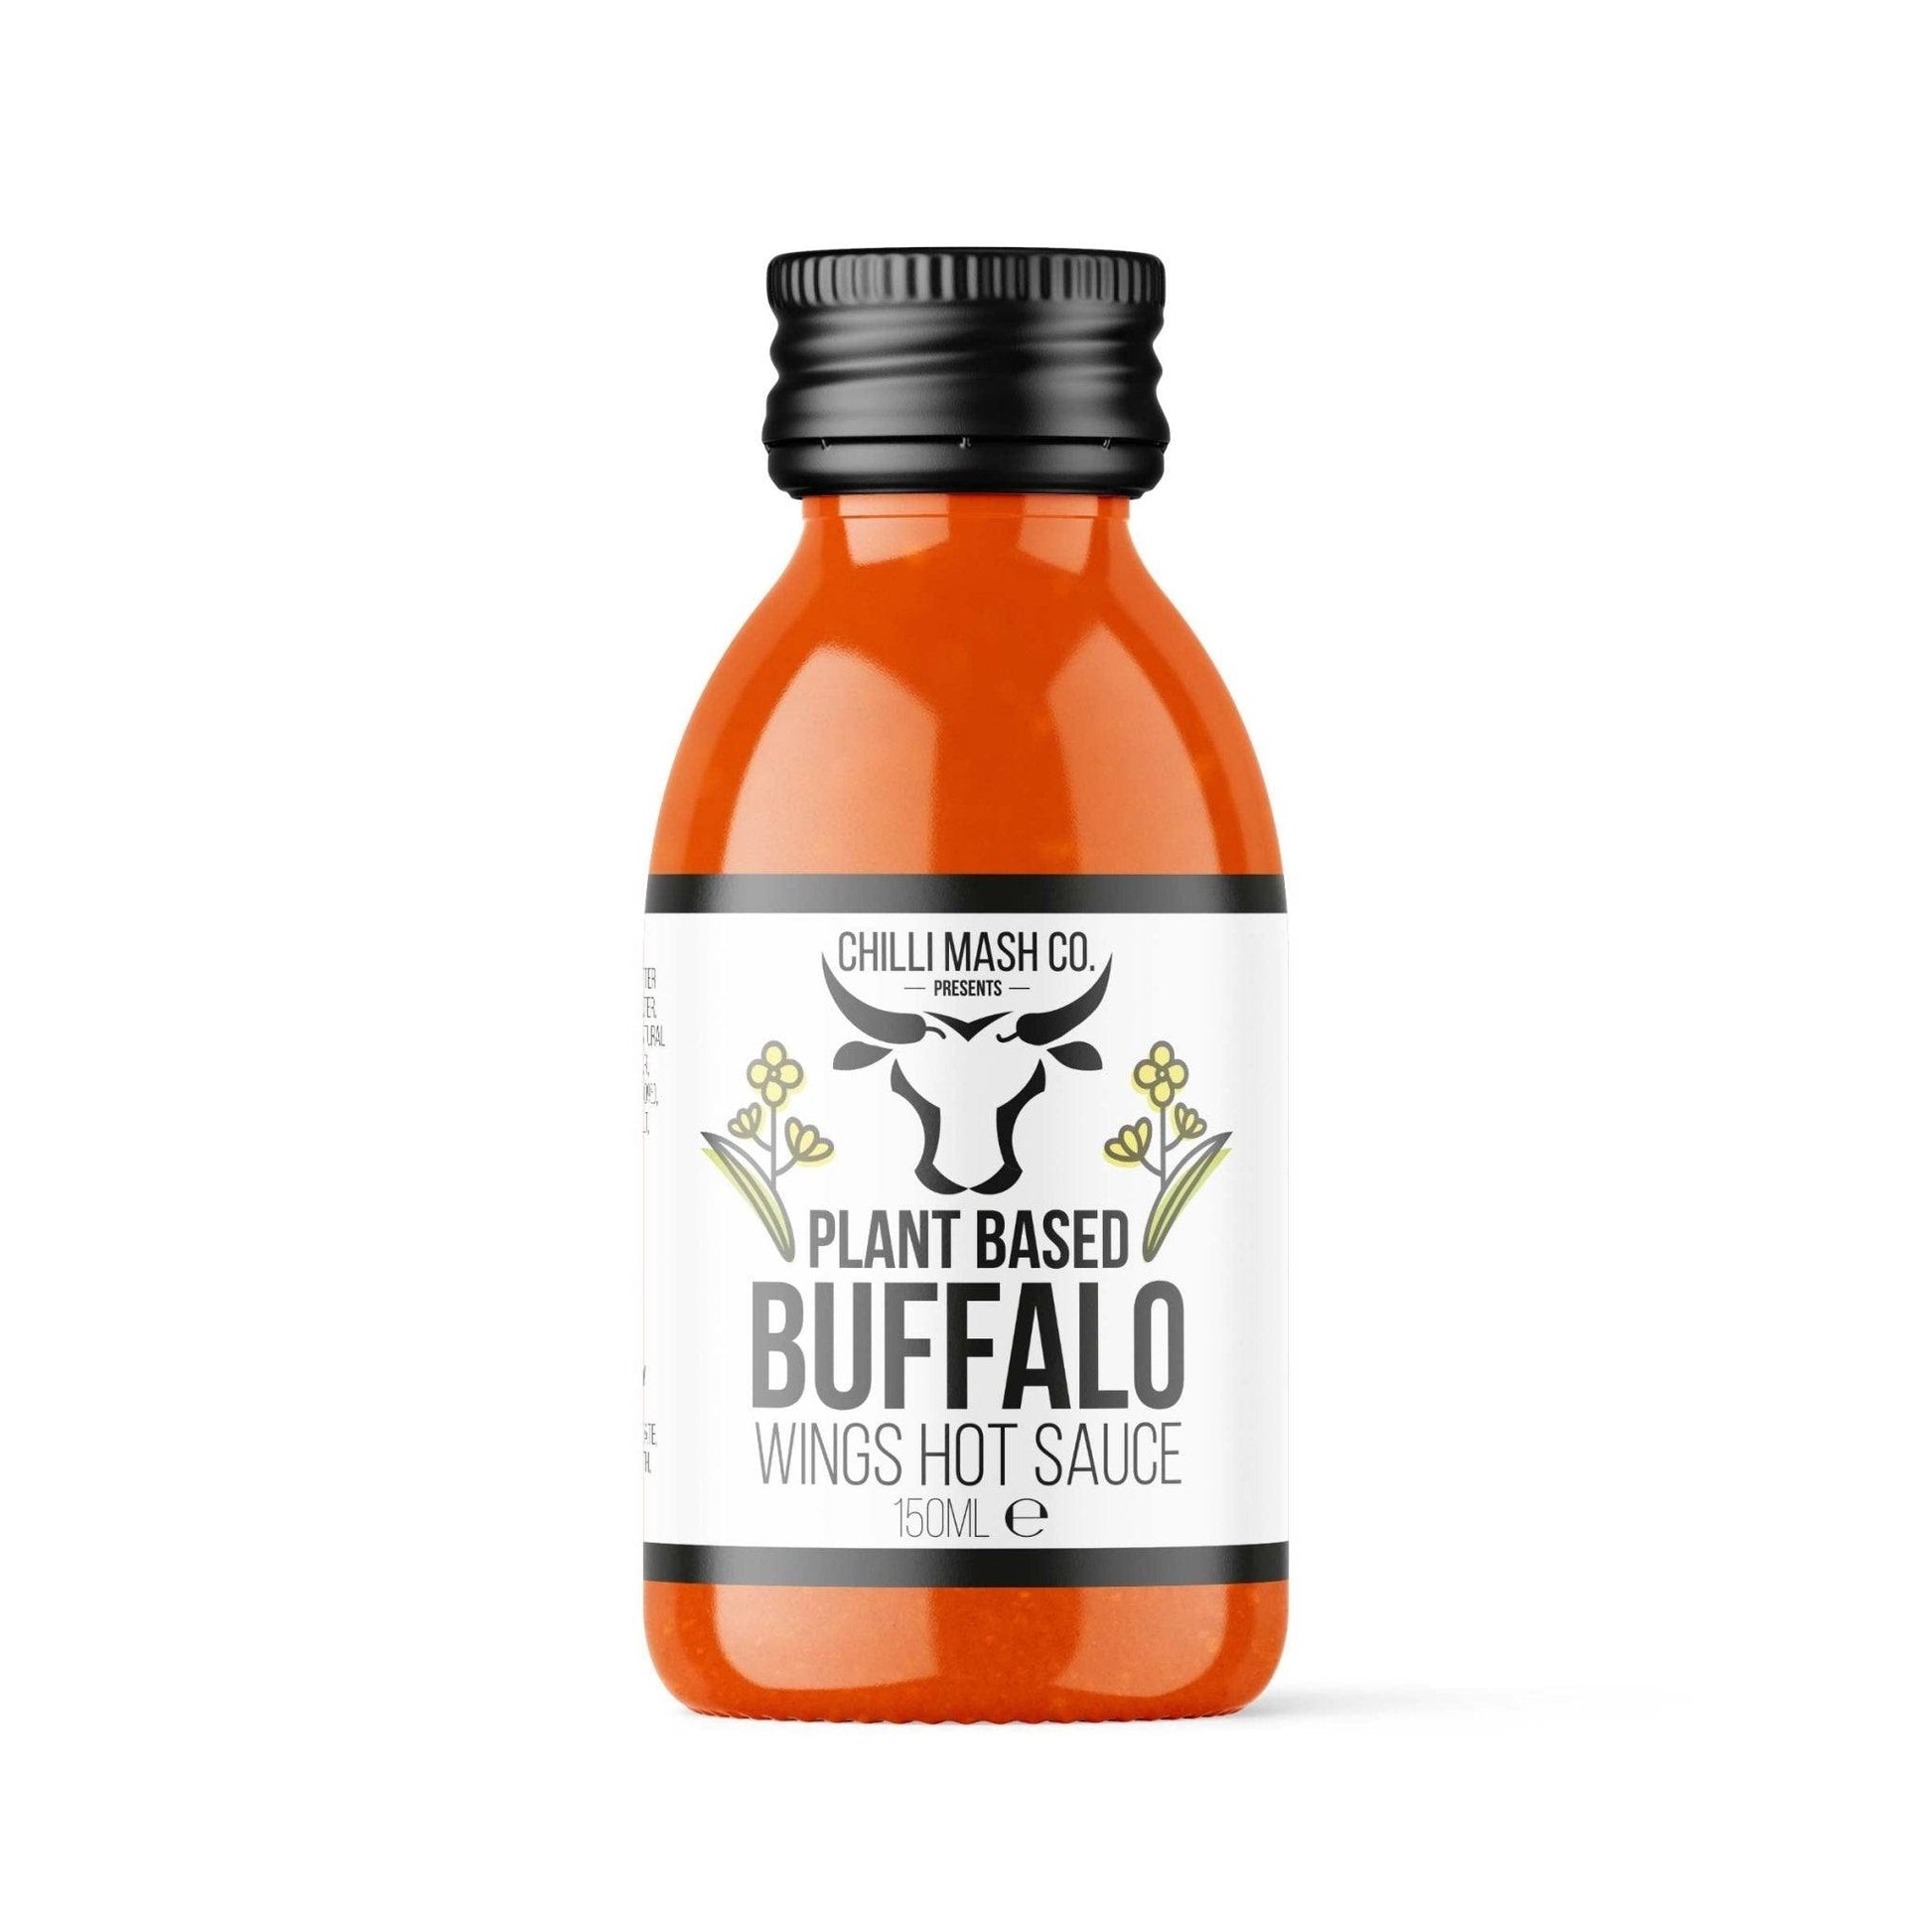 Buffalo Wings Hot Sauce | 150ml | Chilli Mash Co. | Plant Based - One Stop Chilli Shop